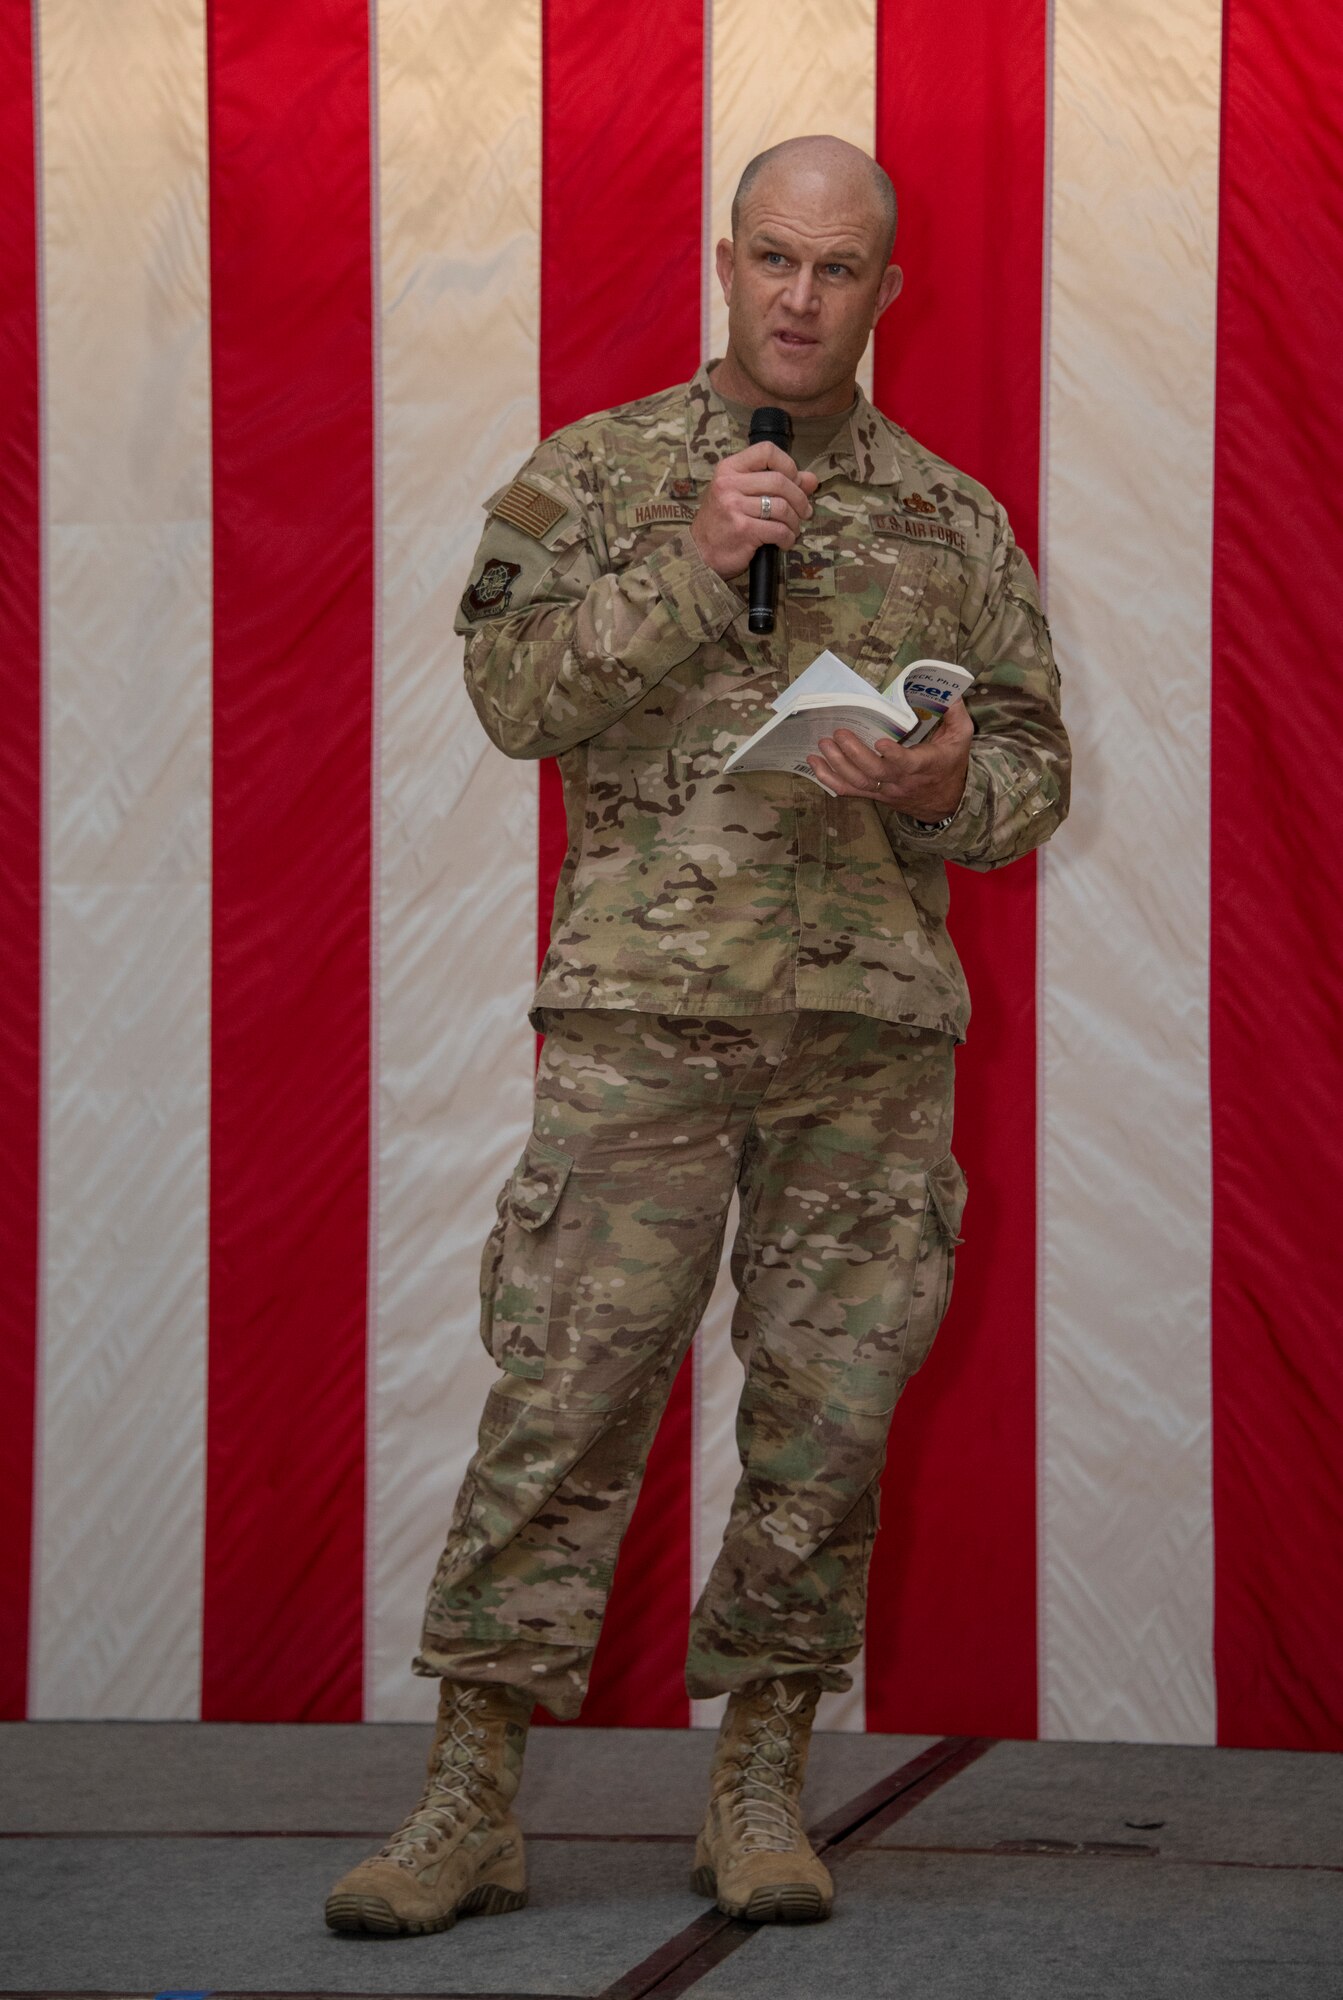 U.S. Air Force Col. David Hammerschmidt, 60th Aircraft Maintenance Group commander, delivers the opening remarks during the Women’s History Month social gathering, March 20, 2019, at Travis Air Force Base, California. Since 1987, the month of March has been designated to celebrate the historical and ongoing achievements and contributions of women. Members of the Women Inspiring the Next Generation’s Success committee were responsible for organizing the event which included an exhibit highlighting extraordinary female heroes and featured speakers prominent in the Travis community. (U.S. Air Force photo by Heide Couch)